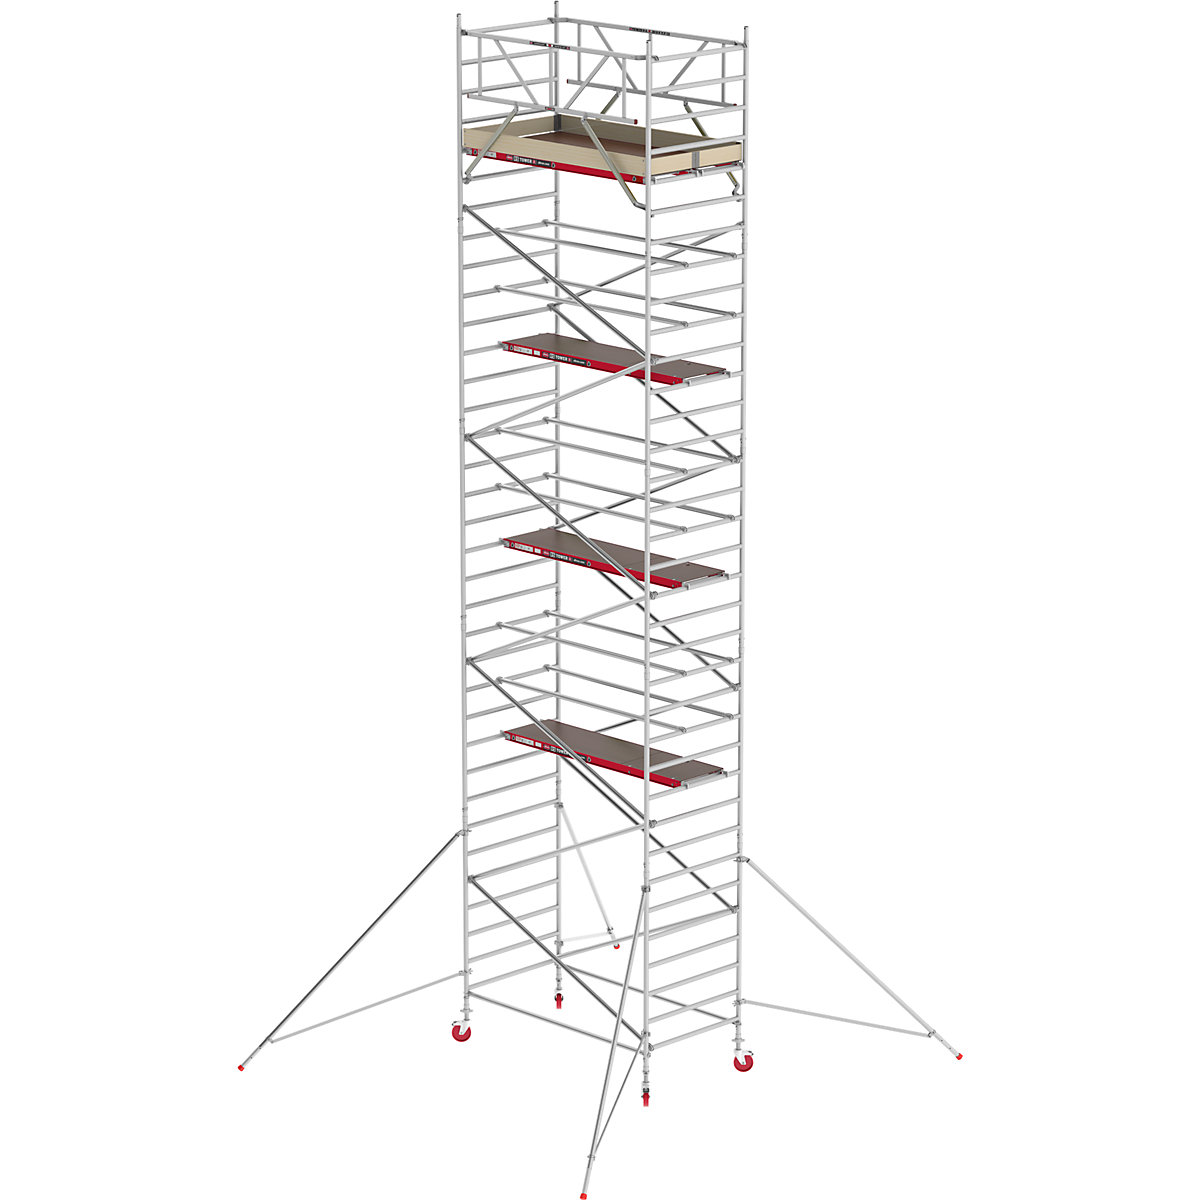 RS TOWER 42 wide mobile access tower – Altrex, wooden platform, length 1.85 m, working height 11.20 m-6